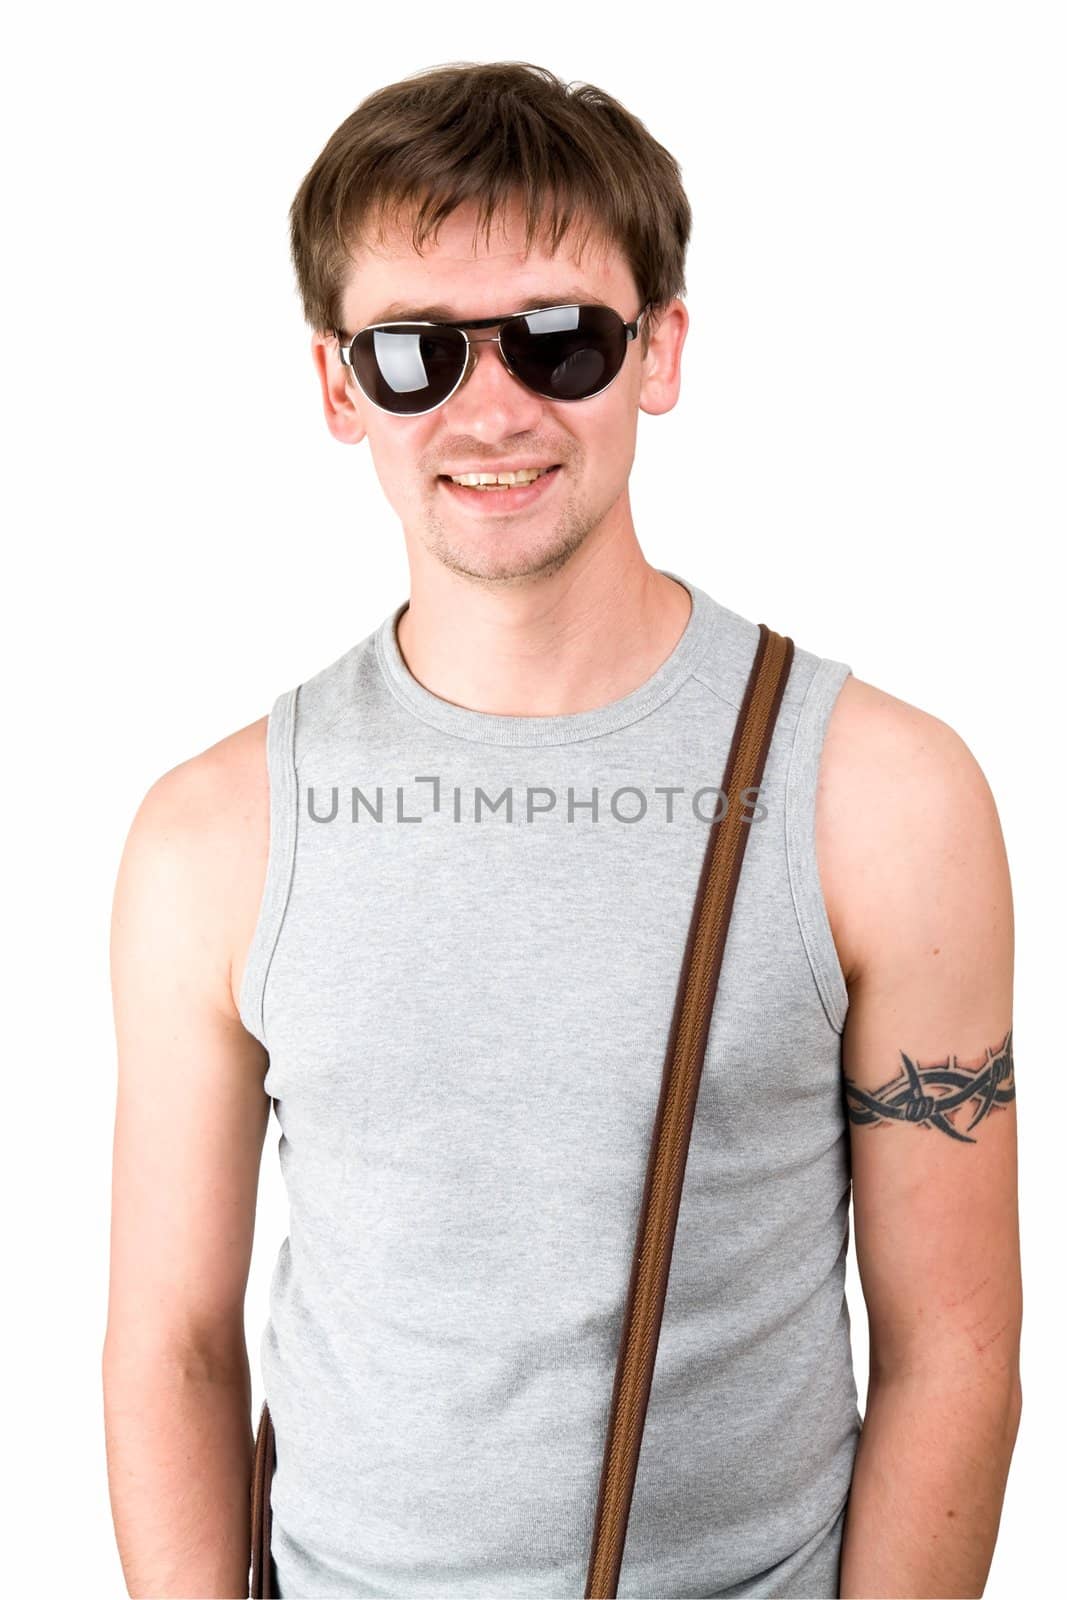 boy in sunglasses on a white background